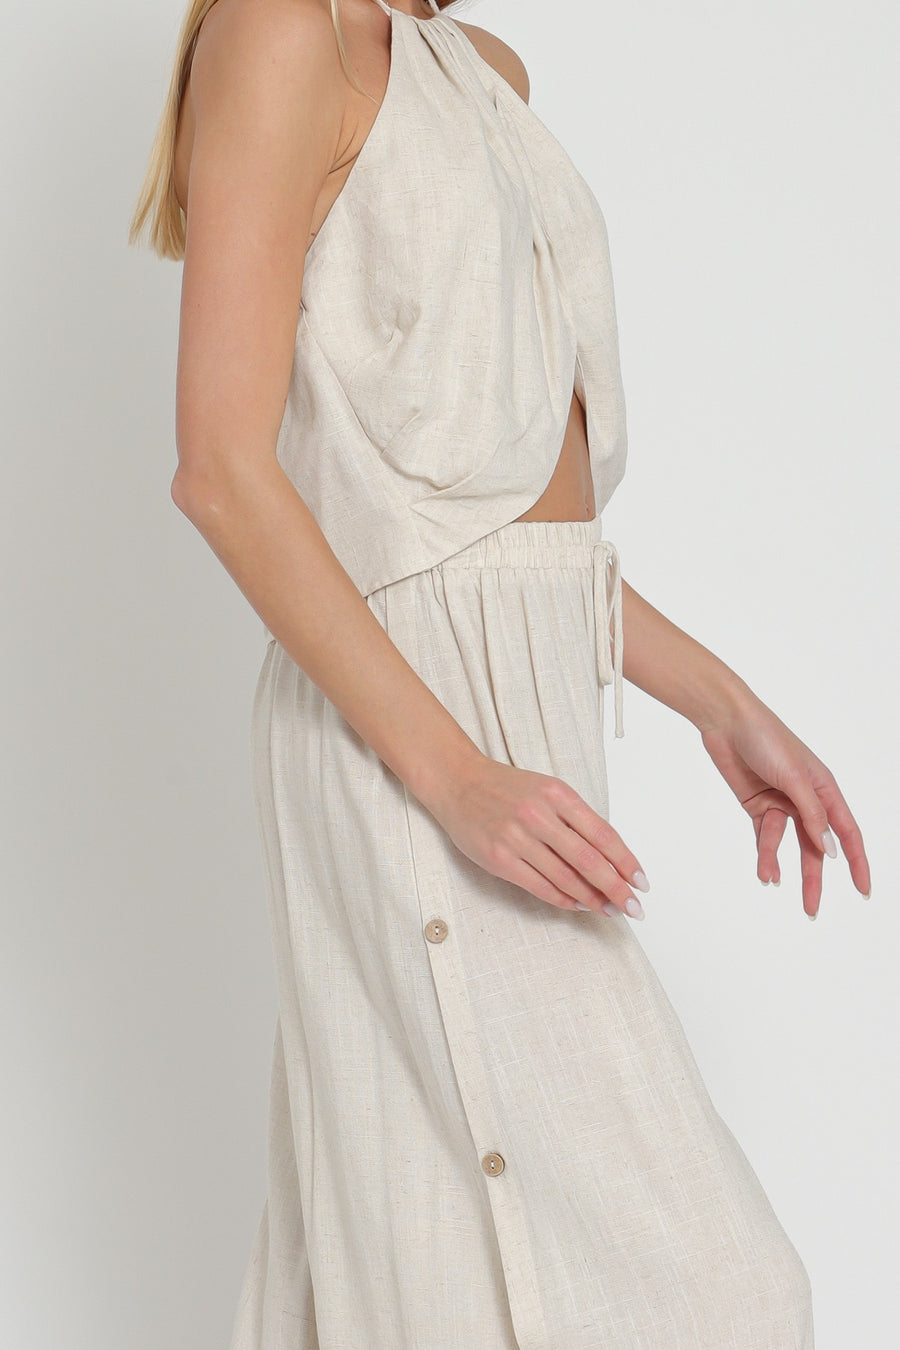 Pairs with the matching Ephie Wide Leg Pant  Featuring a cross over halter top in the color oatmeal